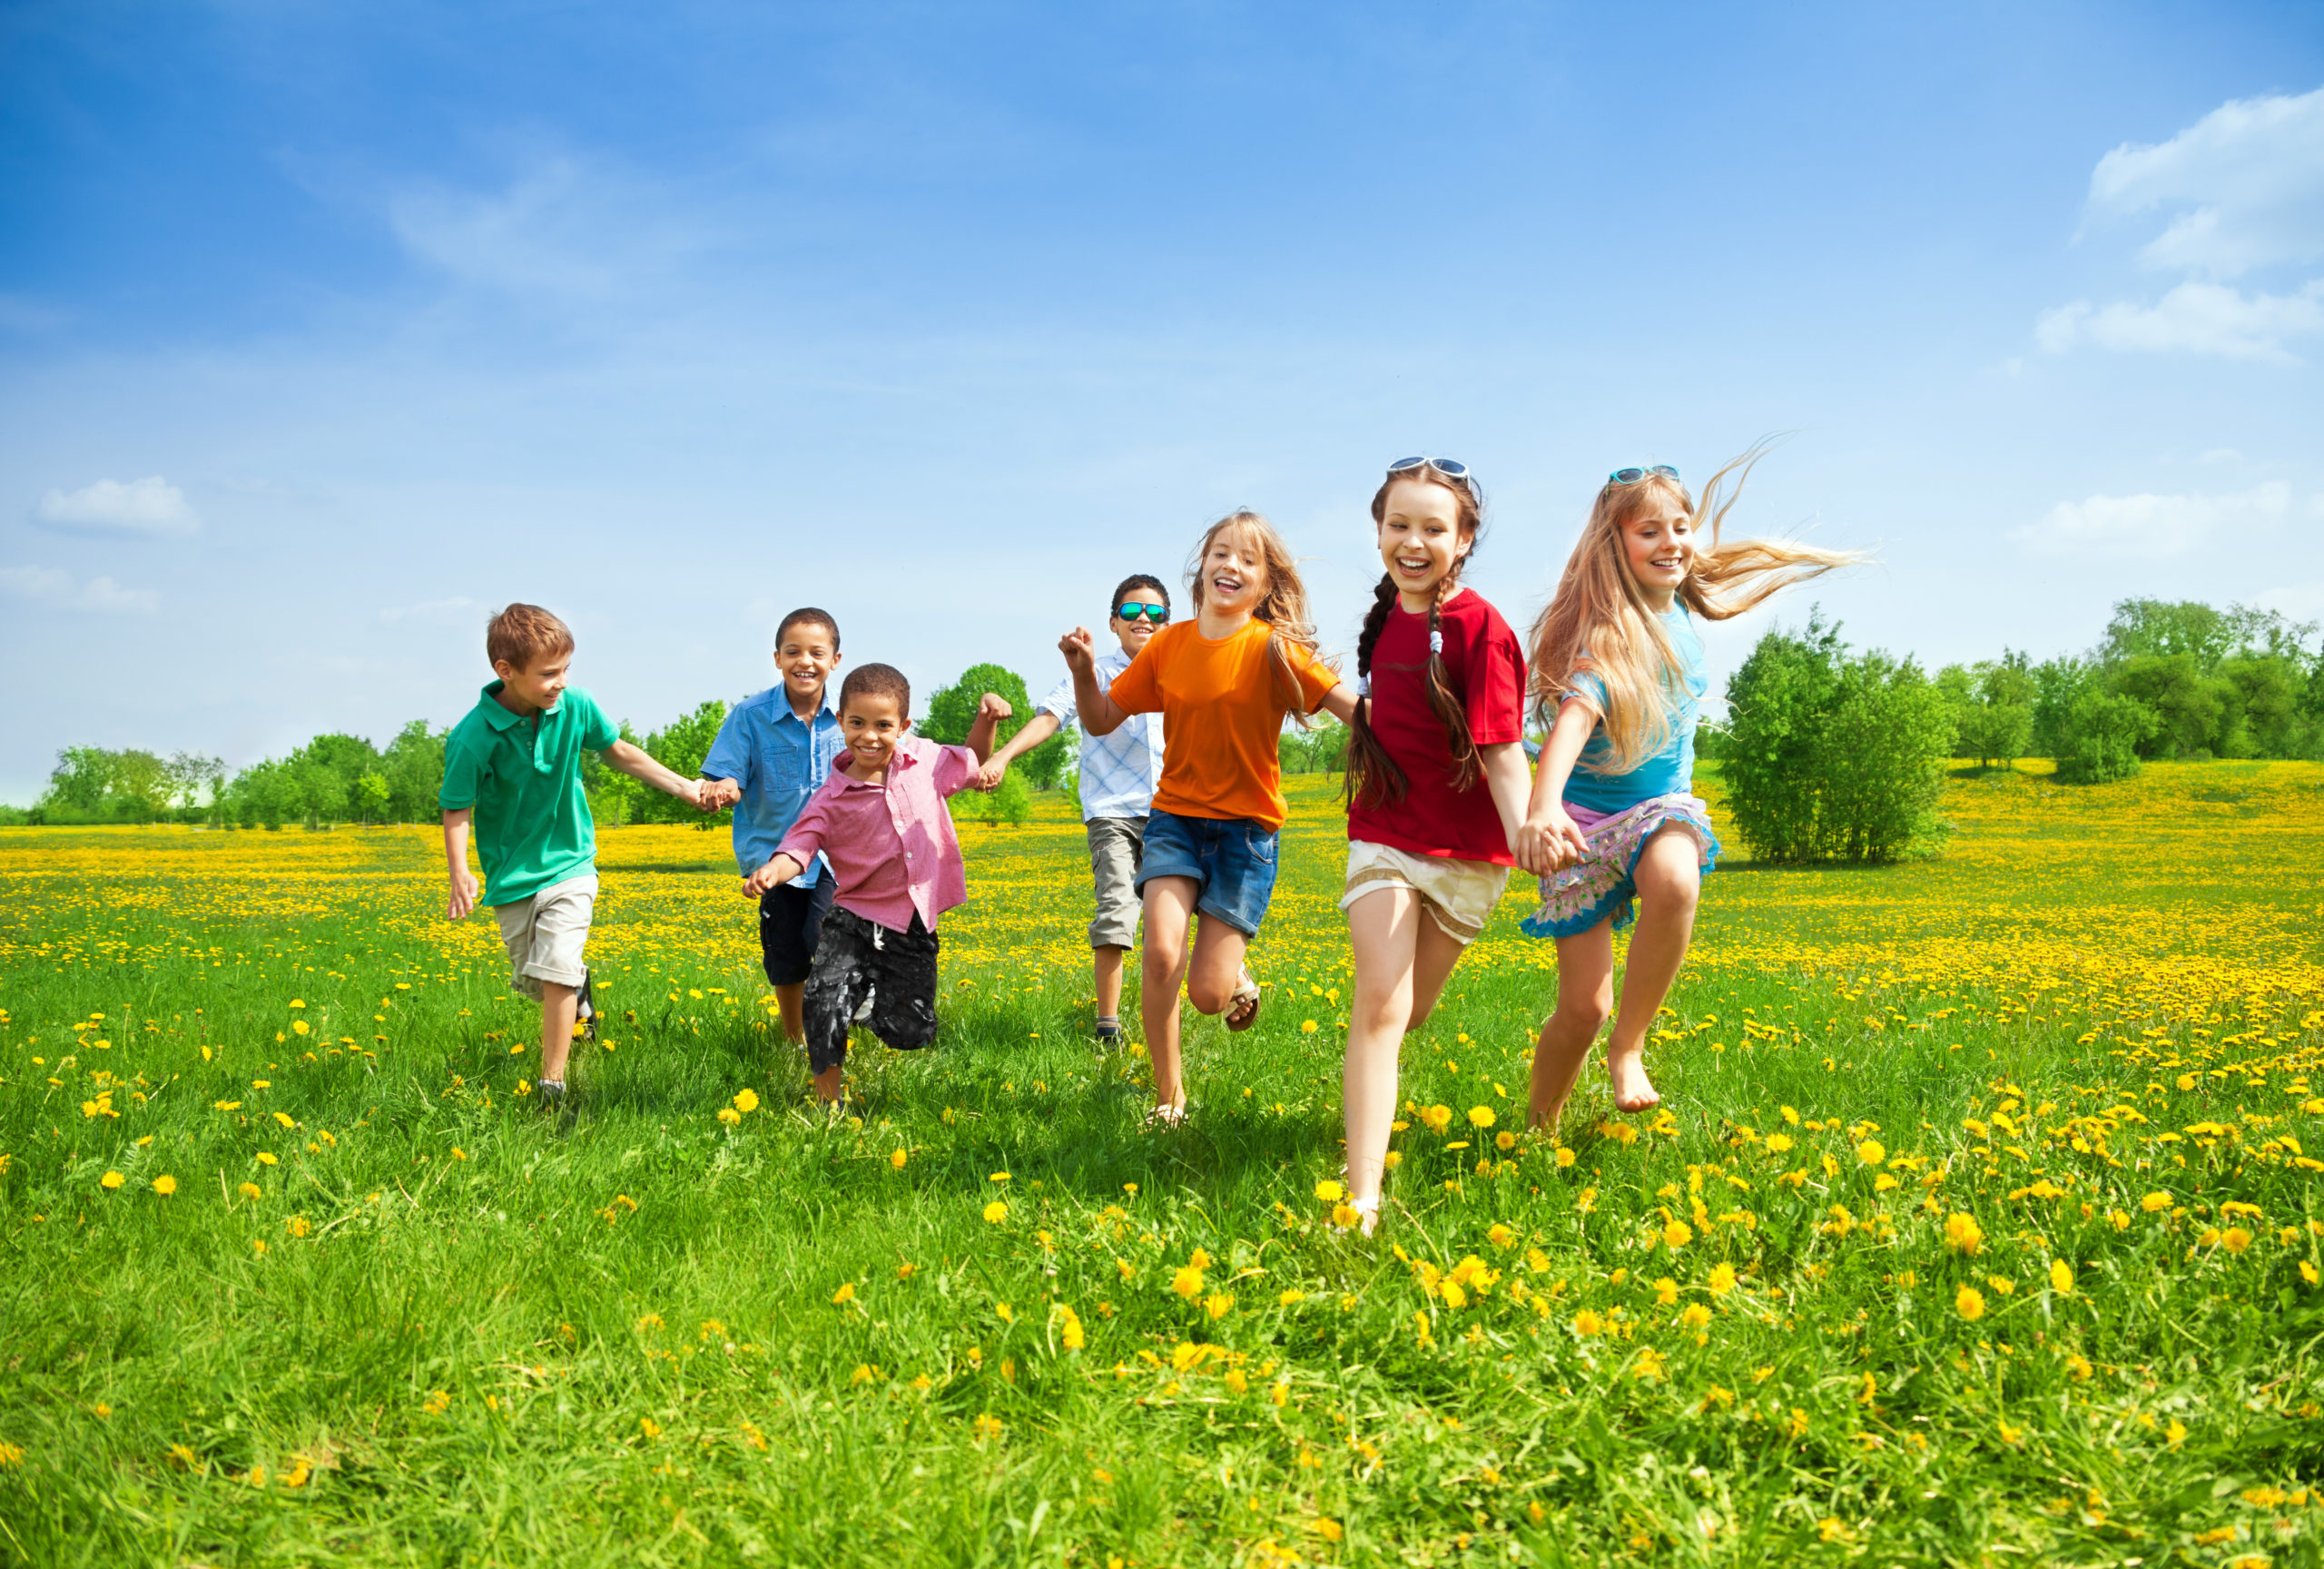 Group of children running and playing during summer time.